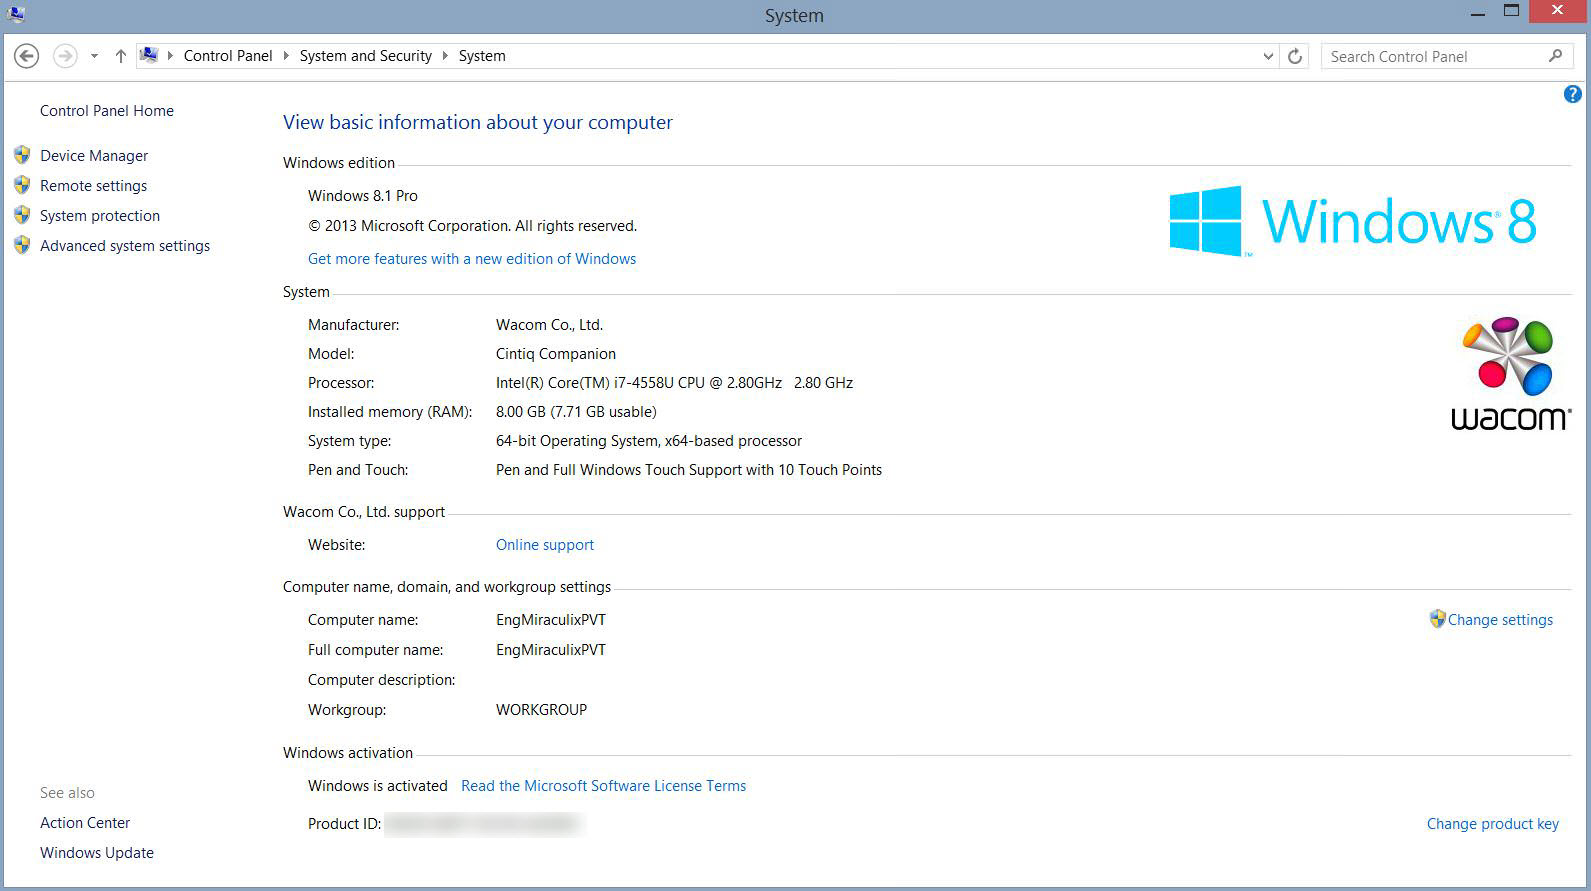 Windows 8.1 "About the PC"